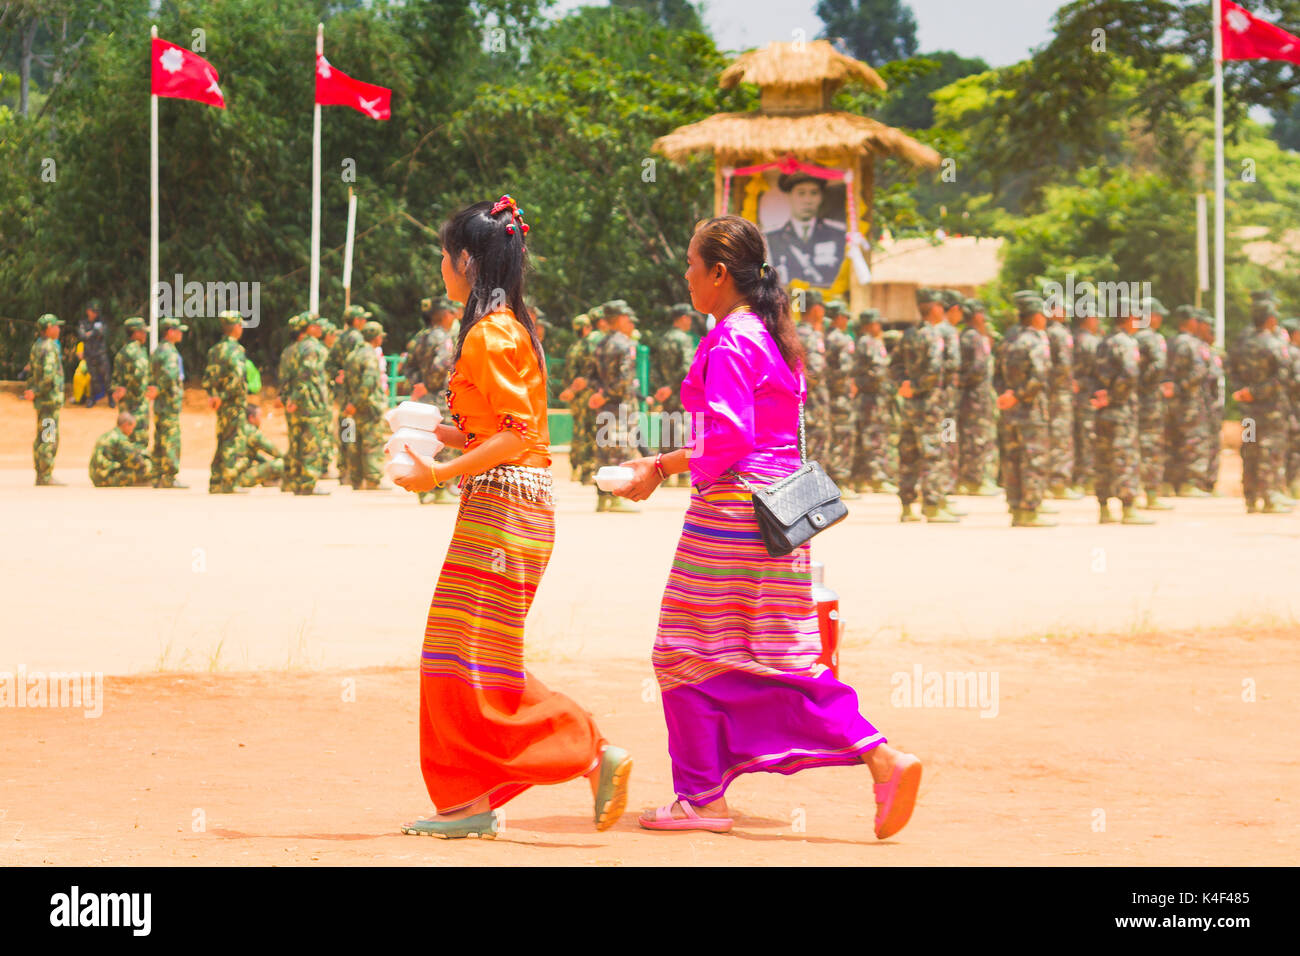 Shan State Army(SSA), Burma - May 21: Unidentified People Dress Up Beautifully In A Shan State Army Day On May 21, 2017 At Loi Kaw Wan, Burma. Stock Photo